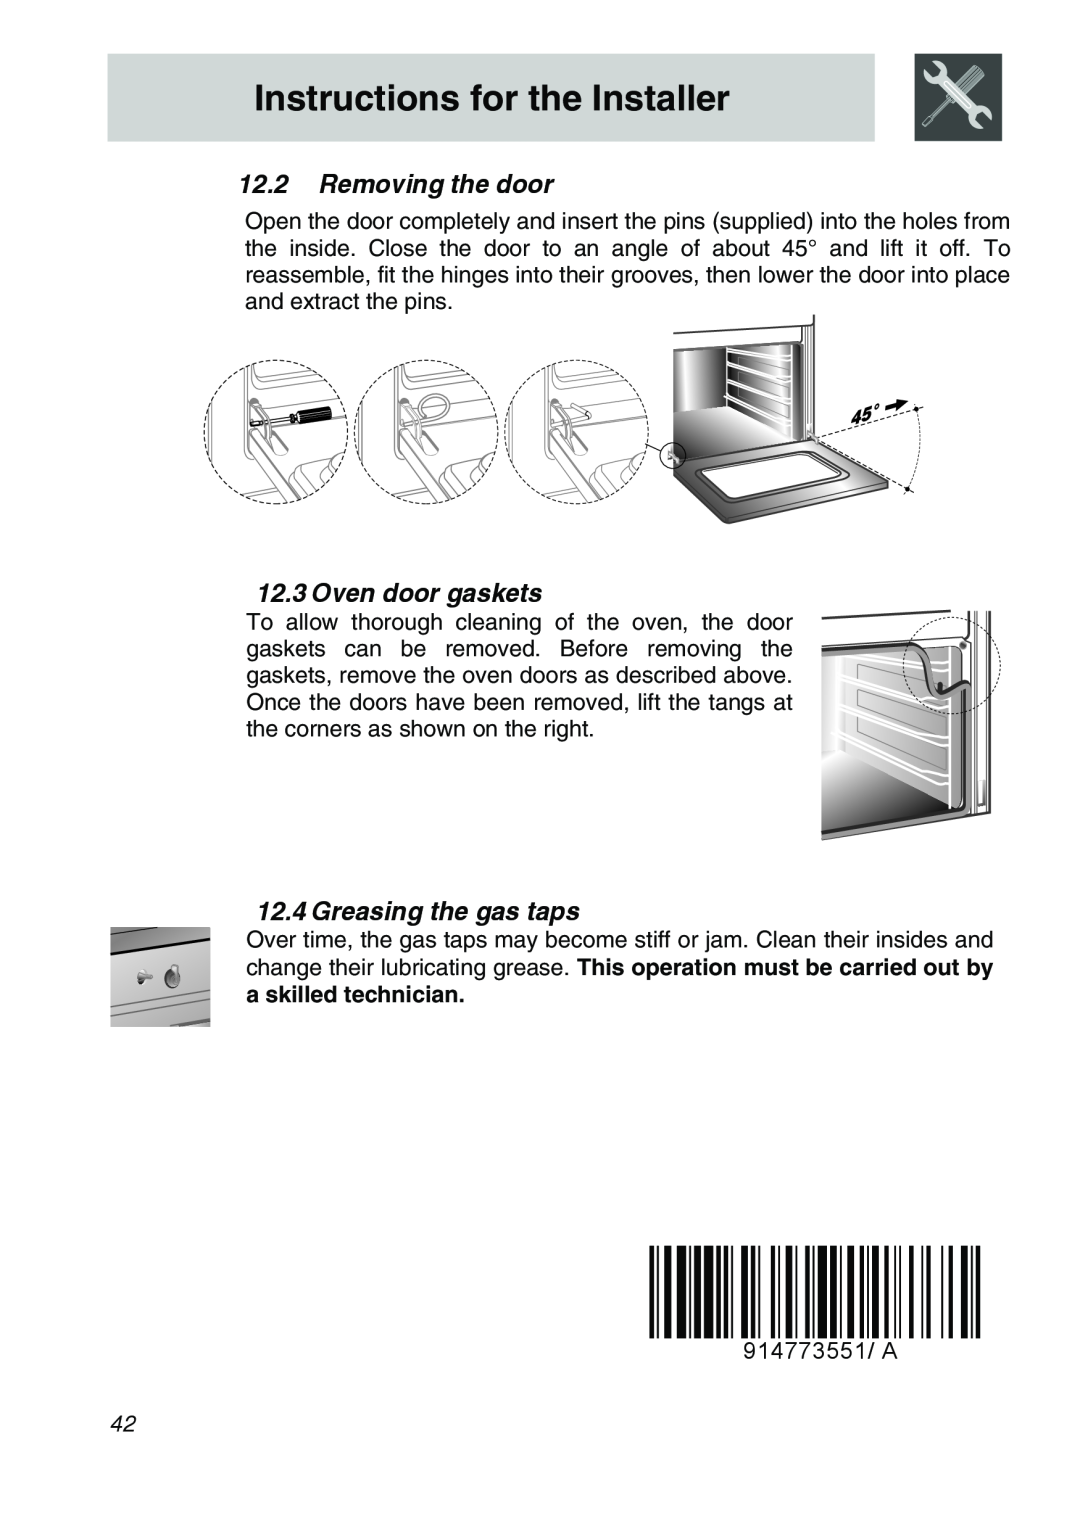 Smeg CSA150X-6 manual 12.2Removing the door, Oven door gaskets, Greasing the gas taps, a skilled technician 